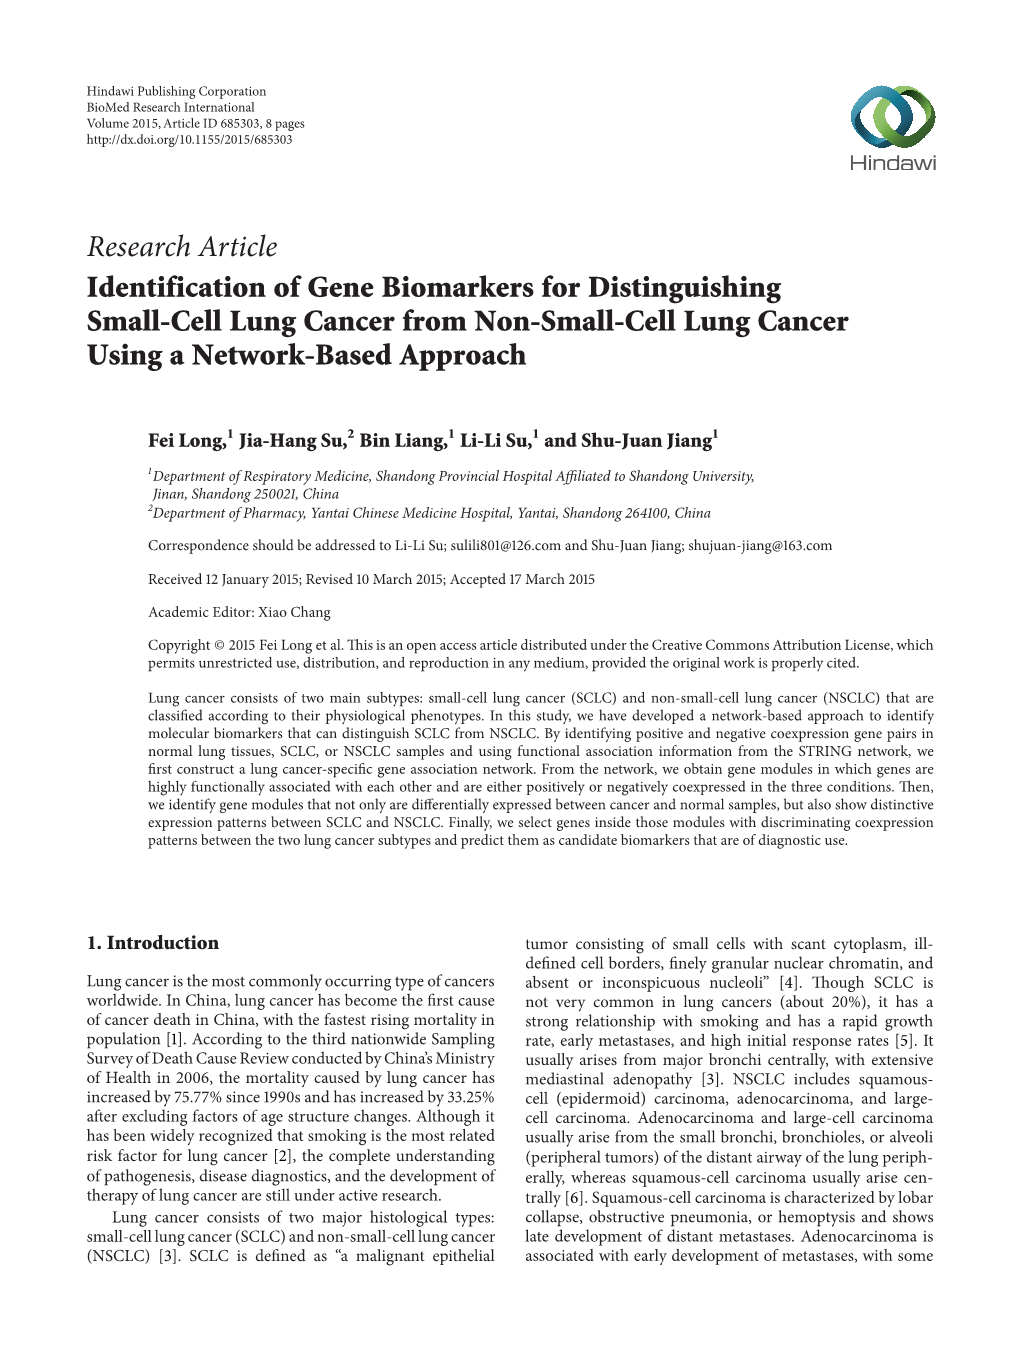 Identification of Gene Biomarkers for Distinguishing Small-Cell Lung Cancer from Non-Small-Cell Lung Cancer Using a Network-Based Approach